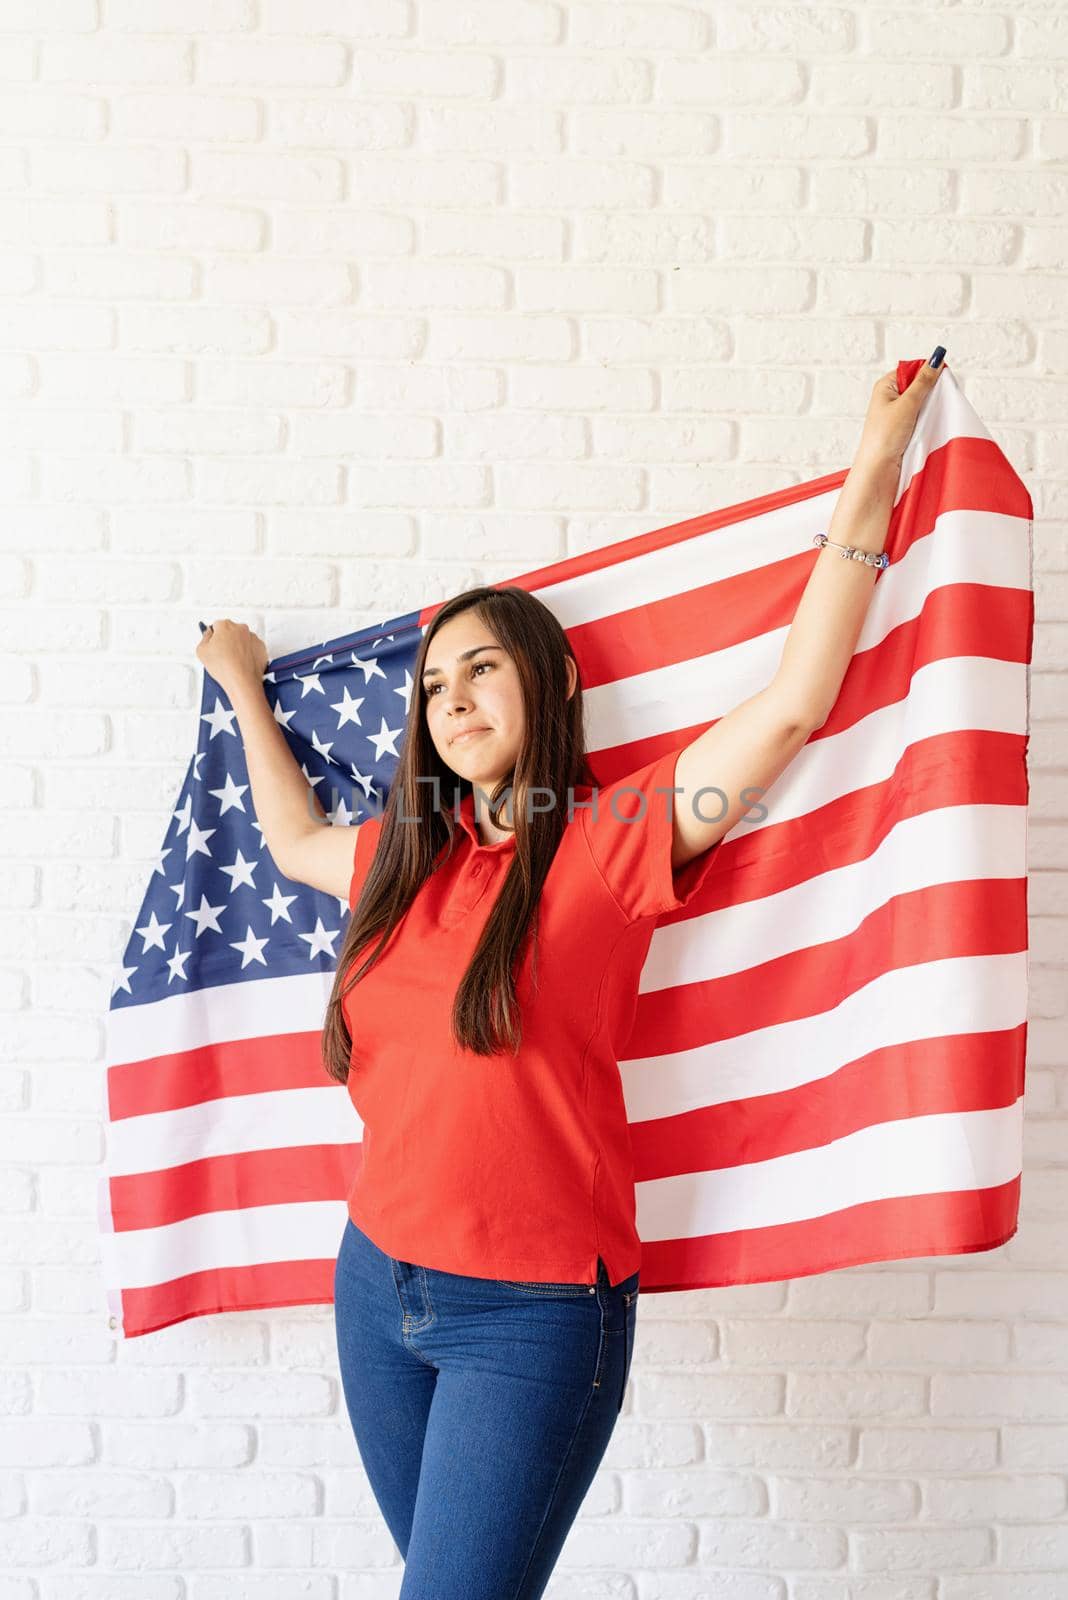 beautiful young woman with american flag, arms outstretched by Desperada